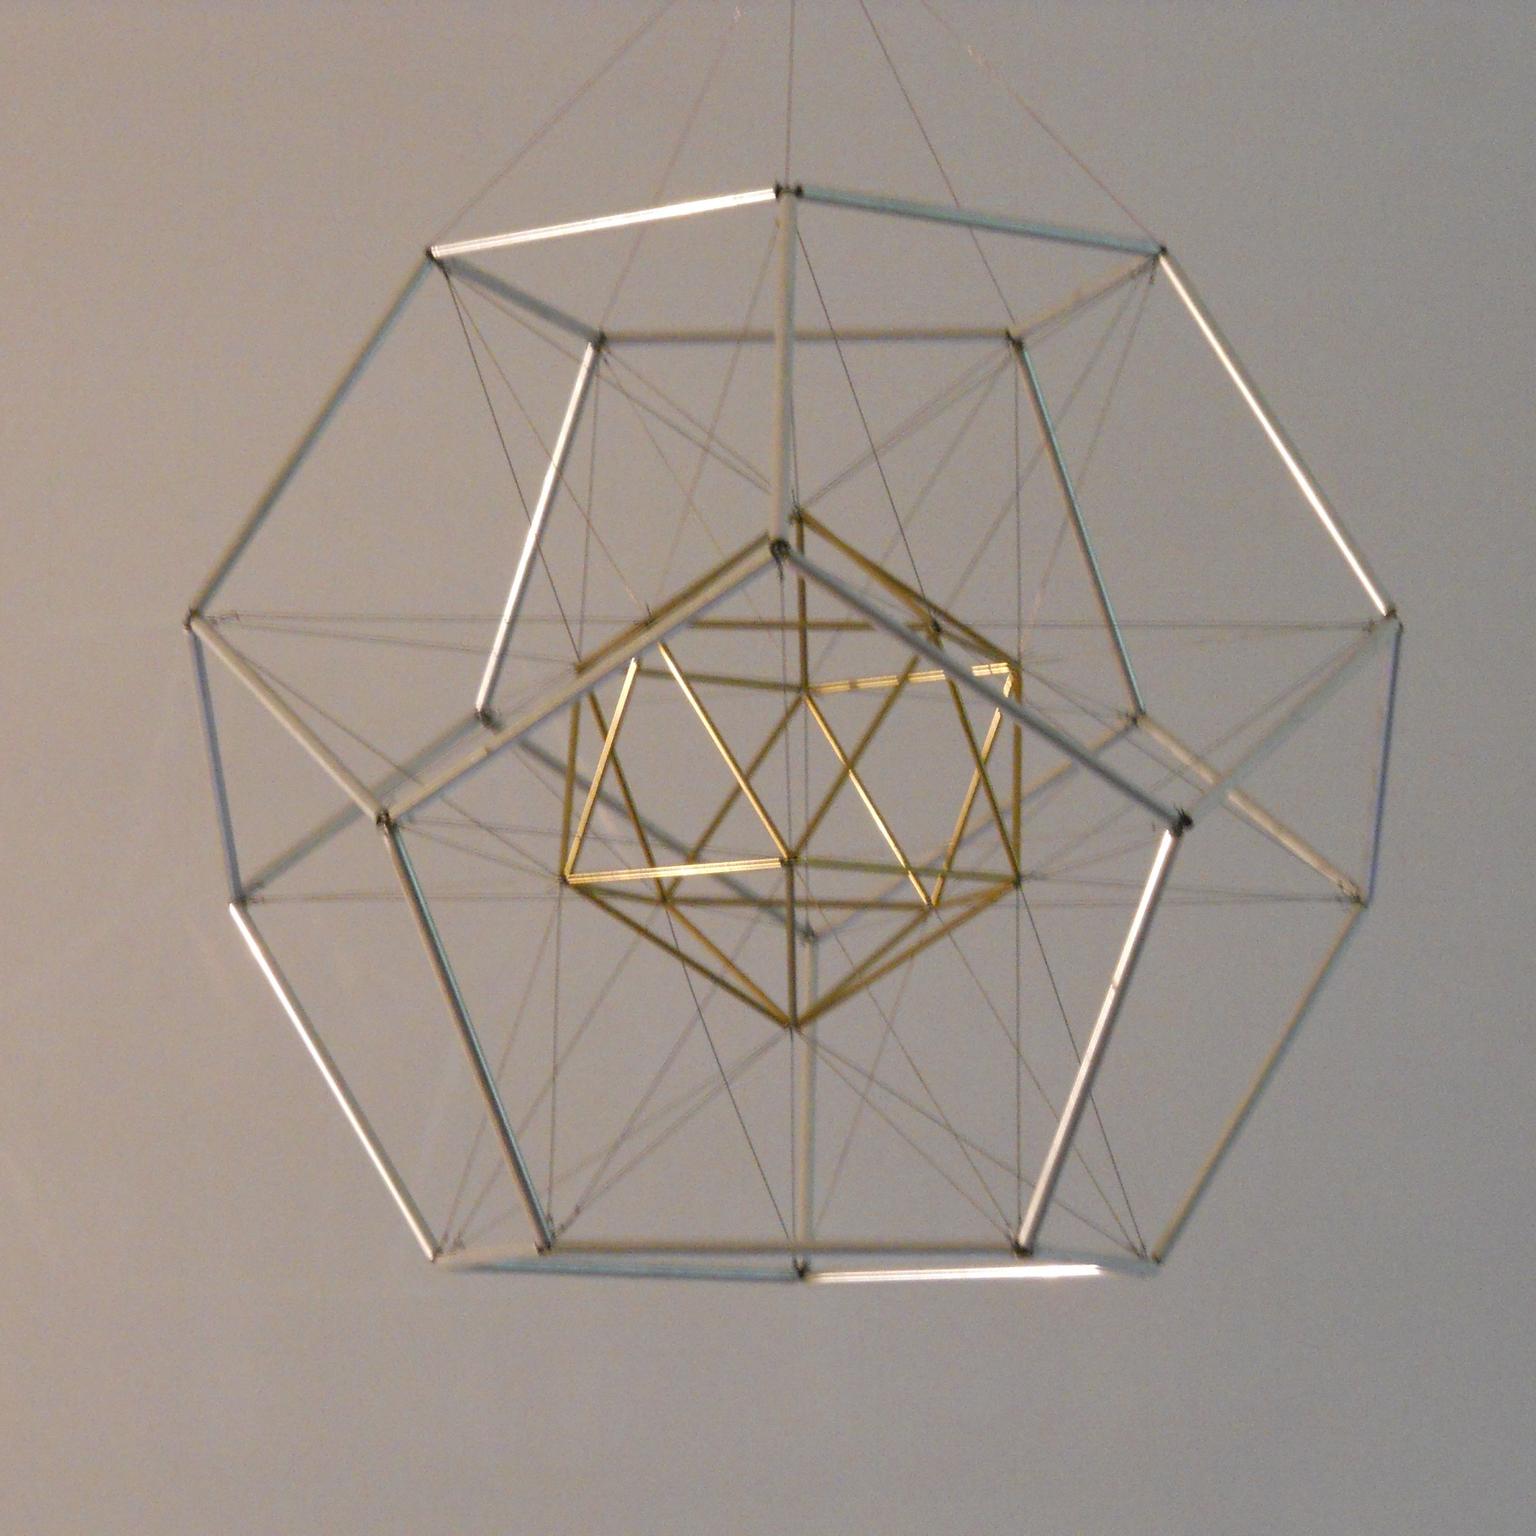 Image for entry 'Dodecahedron with Icosahedron Suspended Inside'